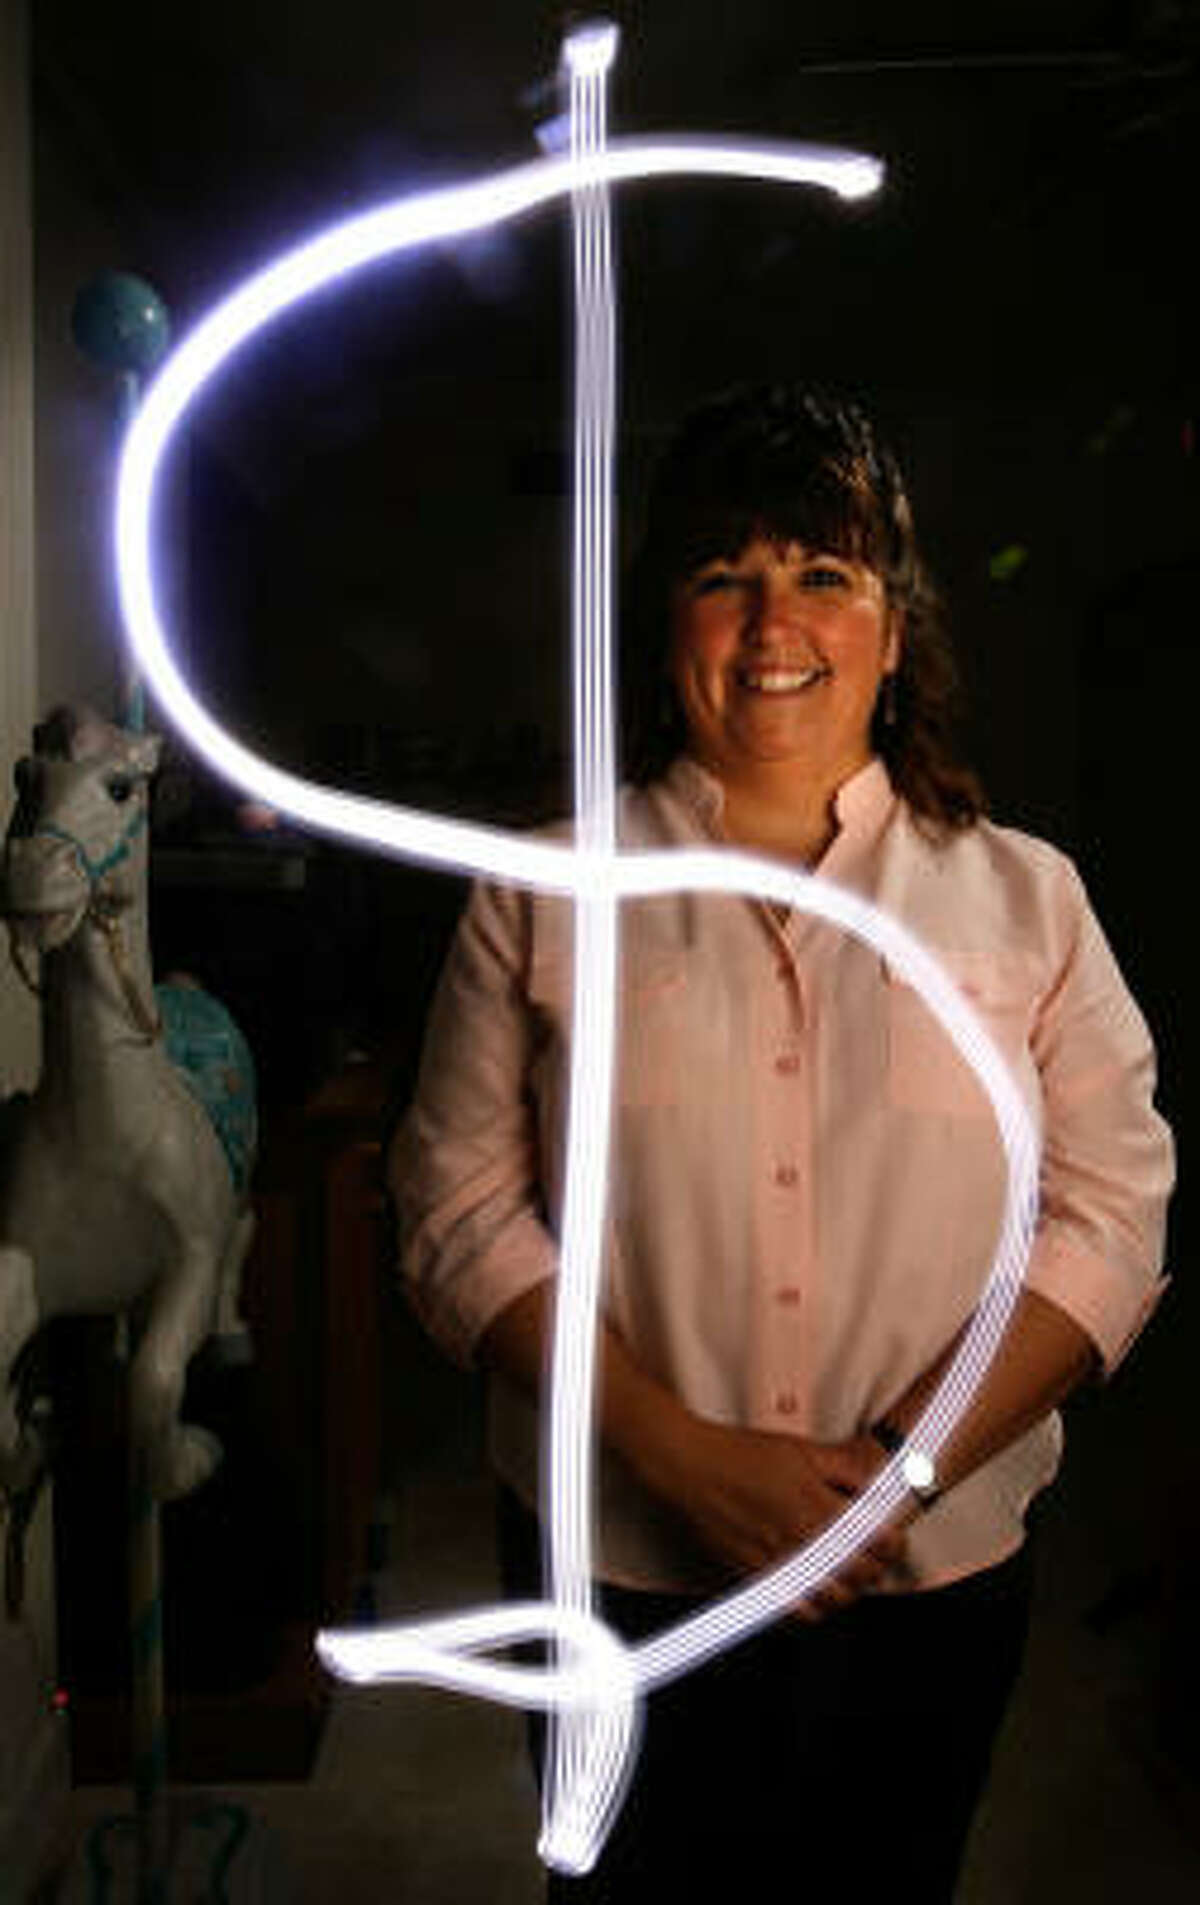 Natasha Kelly uses a light to illustrate the money she saved on her utility bill by choosing a month-to-month plan. The photo is a single shot using a time exposure of Kelly tracing a dollar sign, followed by a flash to capture her image.